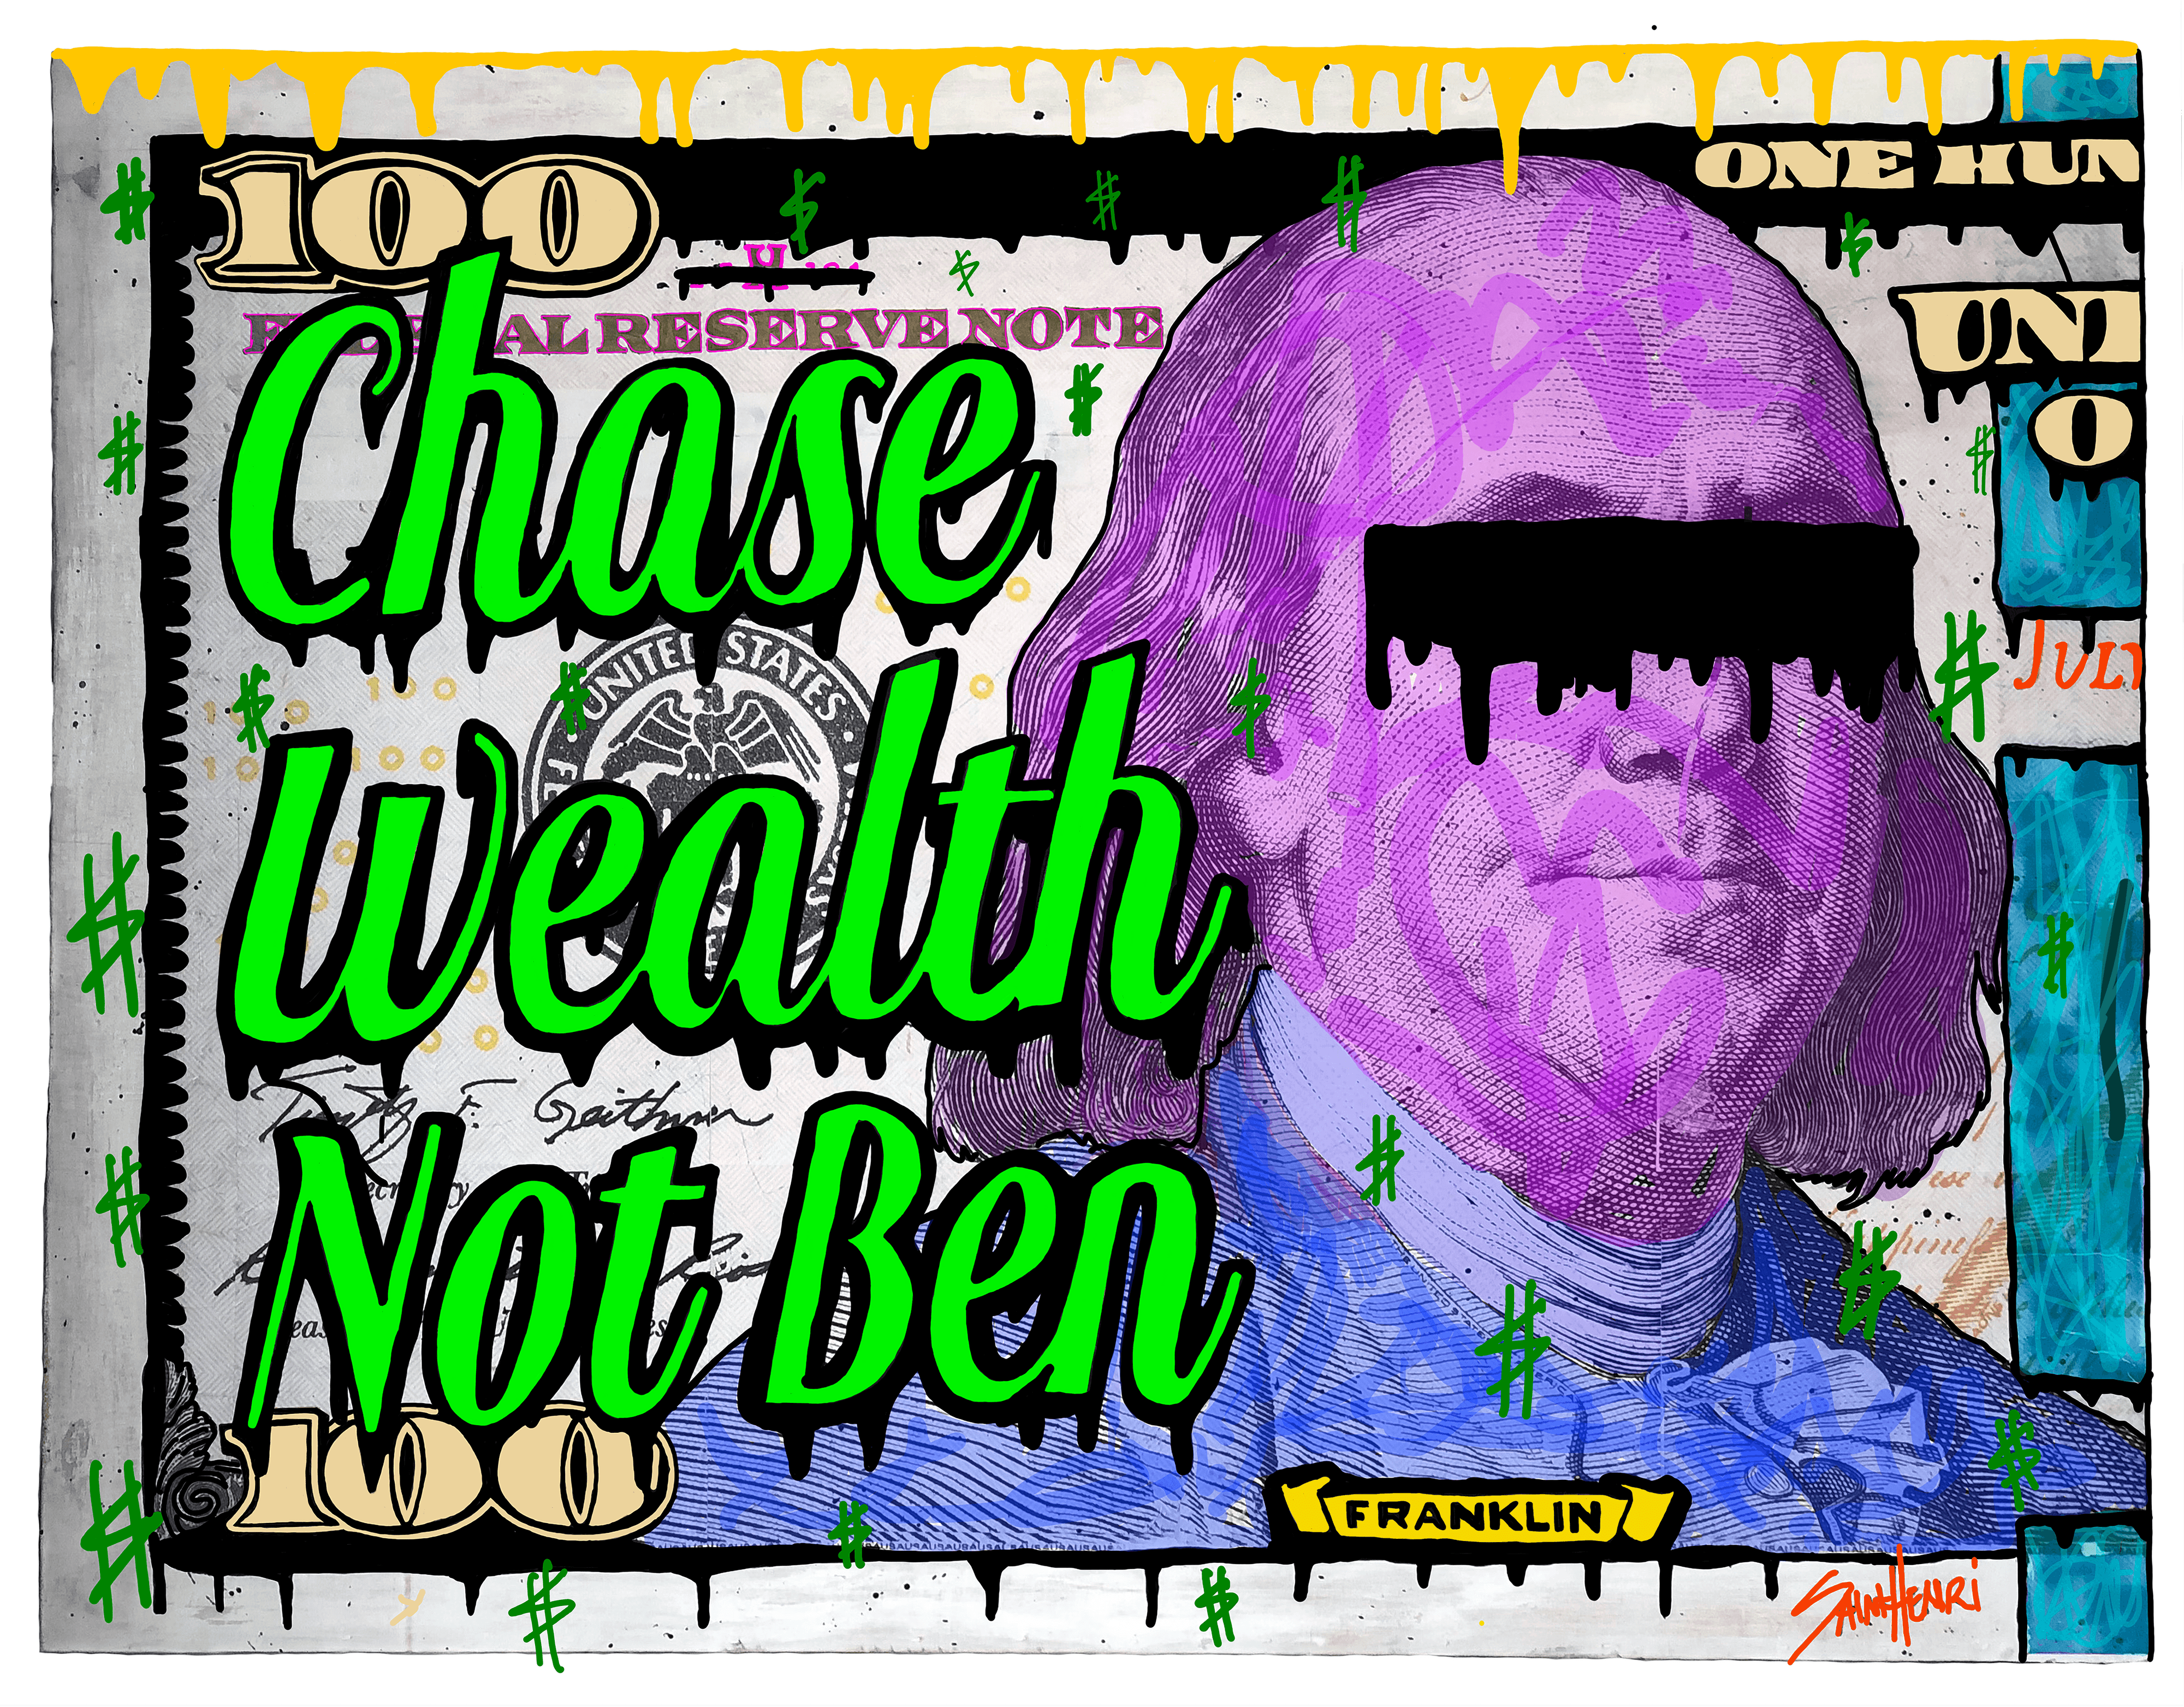 CHASE WEALTH NOT BEN